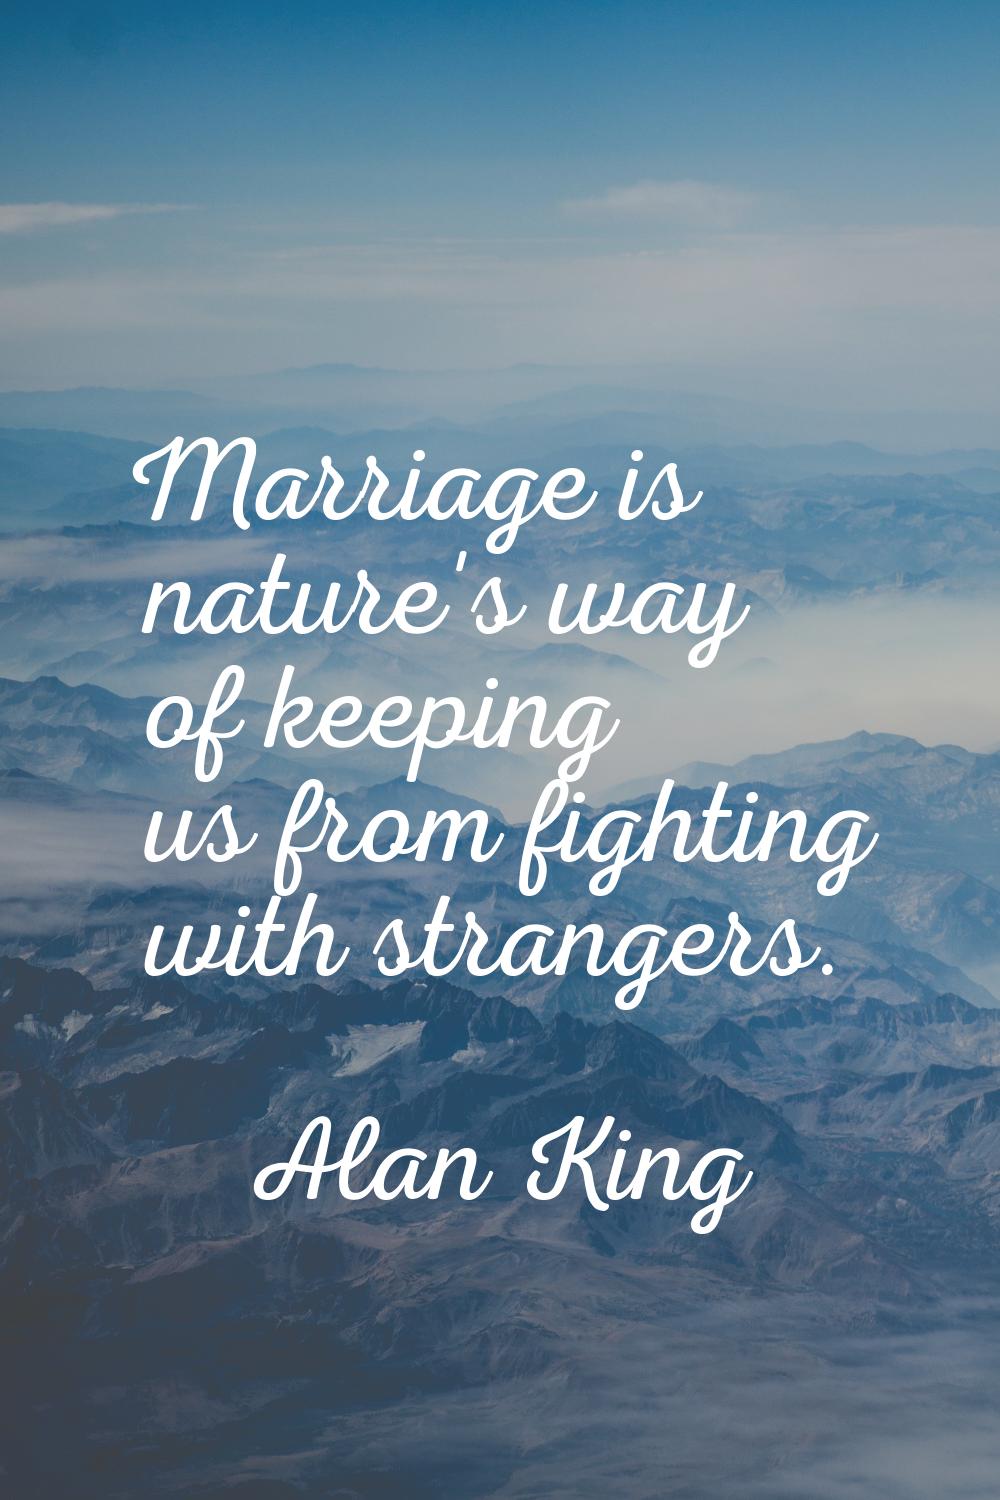 Marriage is nature's way of keeping us from fighting with strangers.